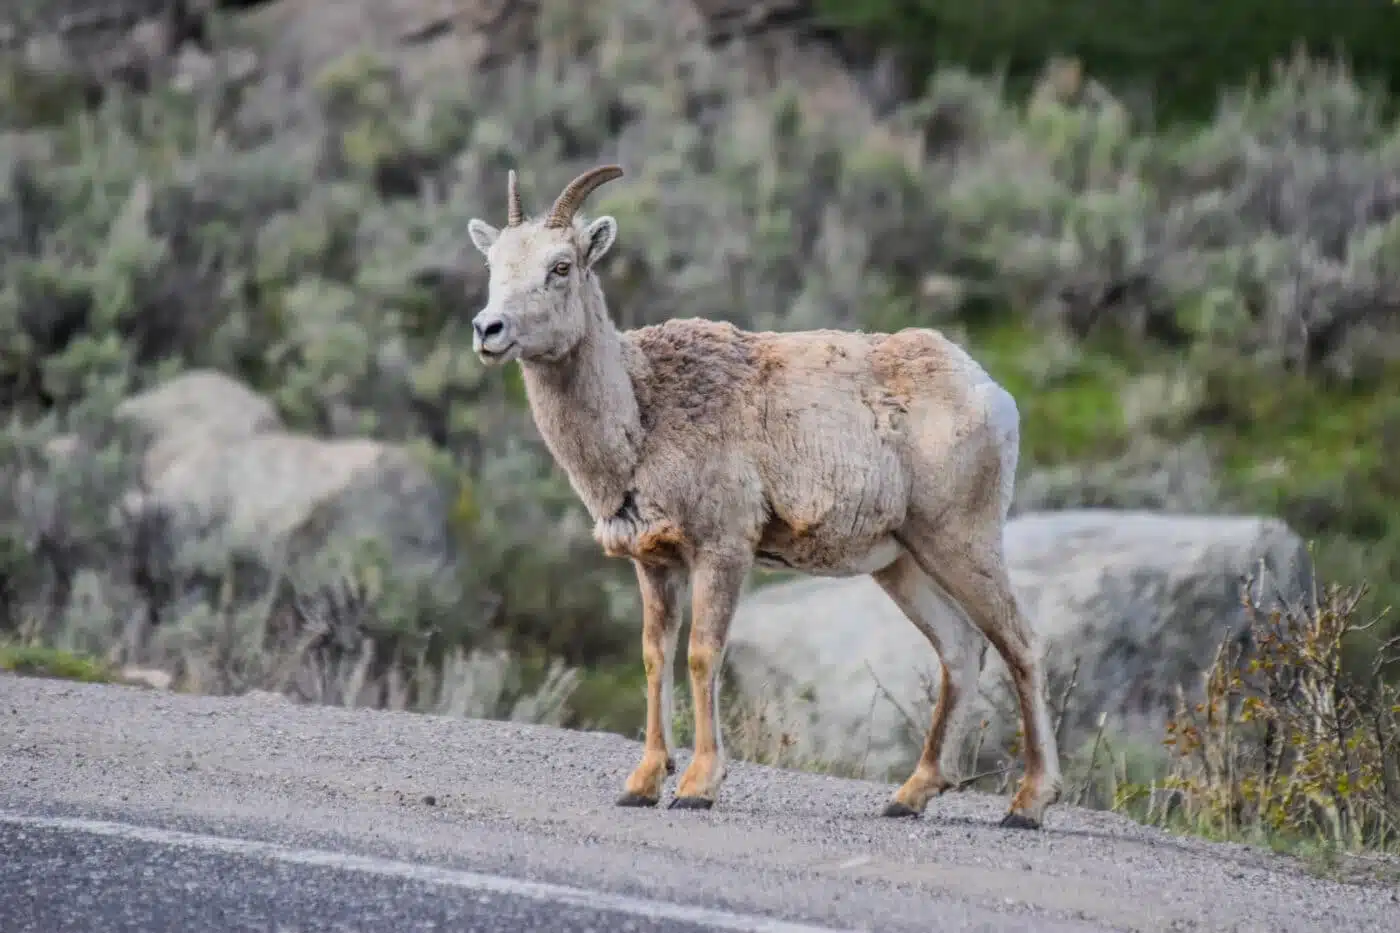 How to Get to Yellowstone - Bighorn sheep